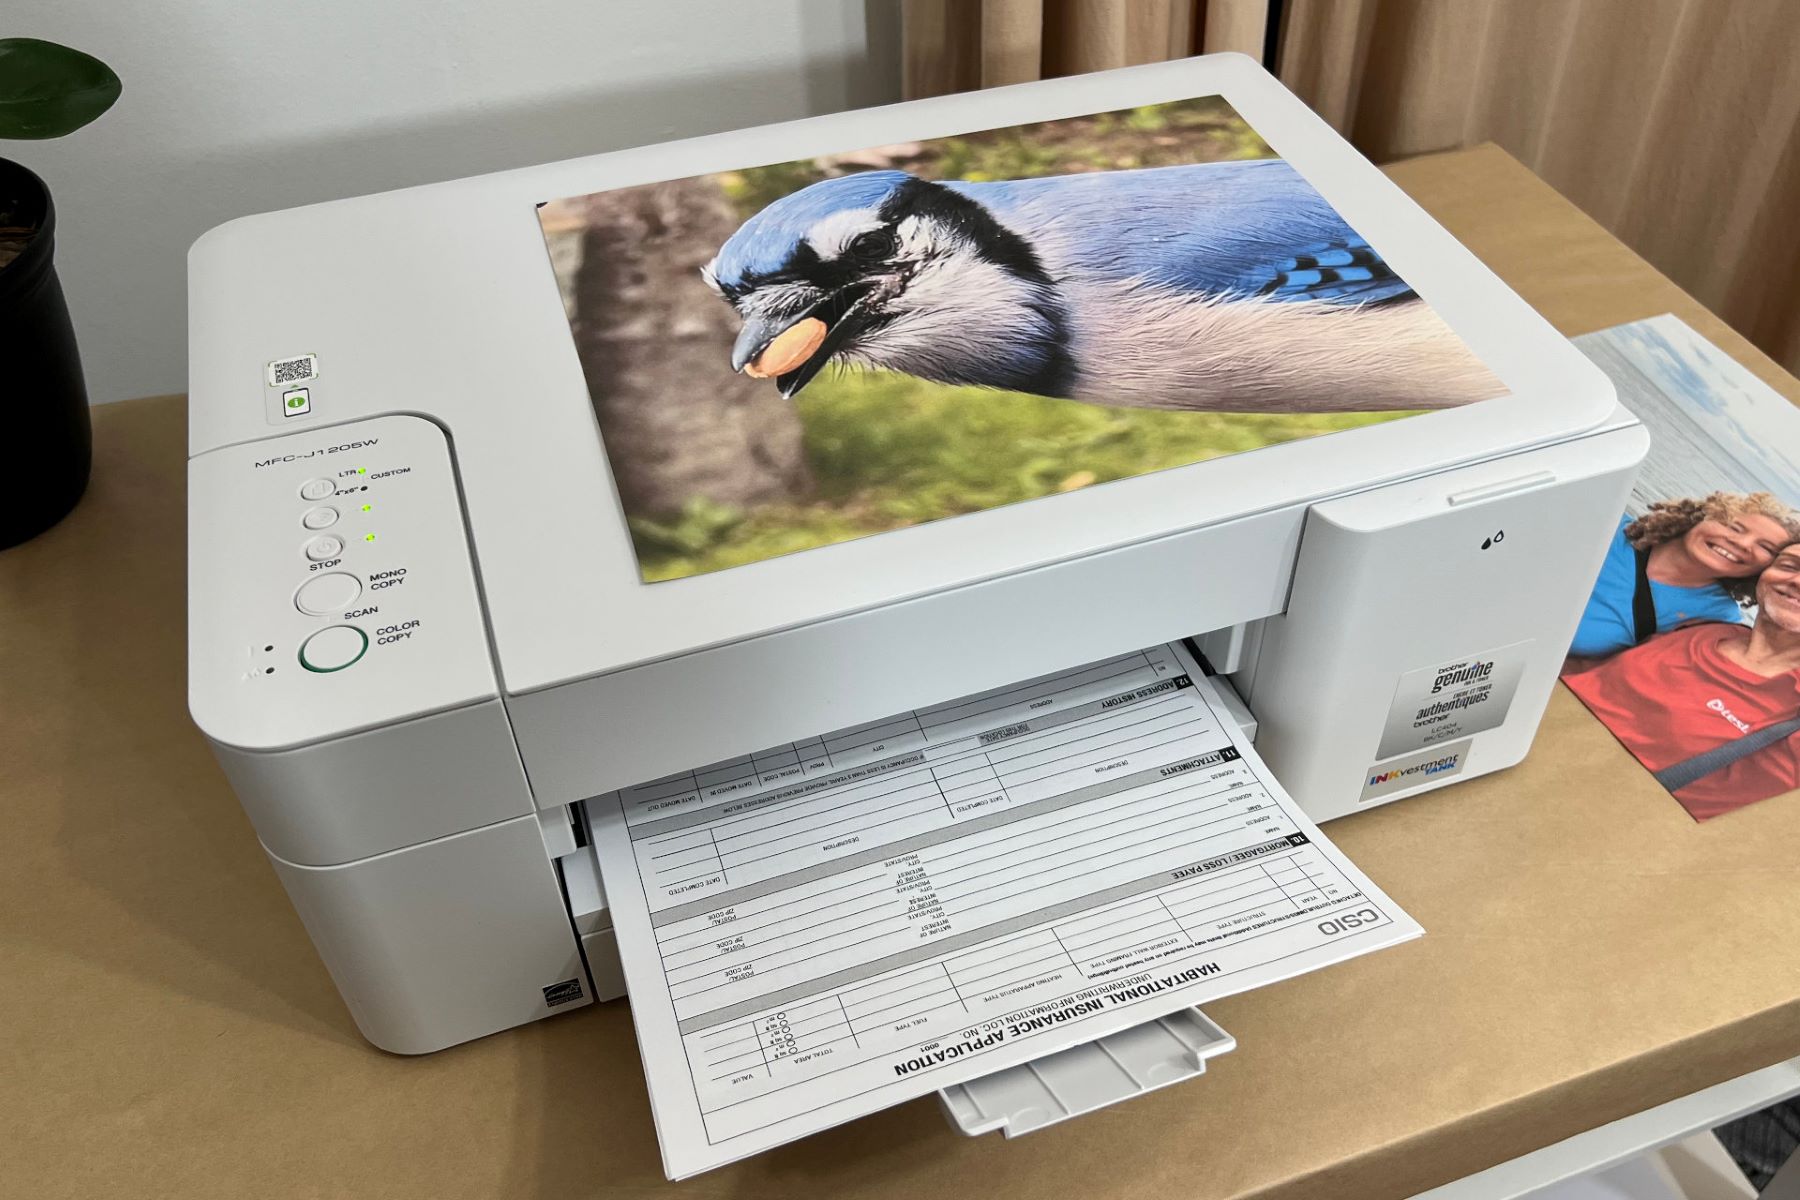 How To Override Low Toner On Brother Printer